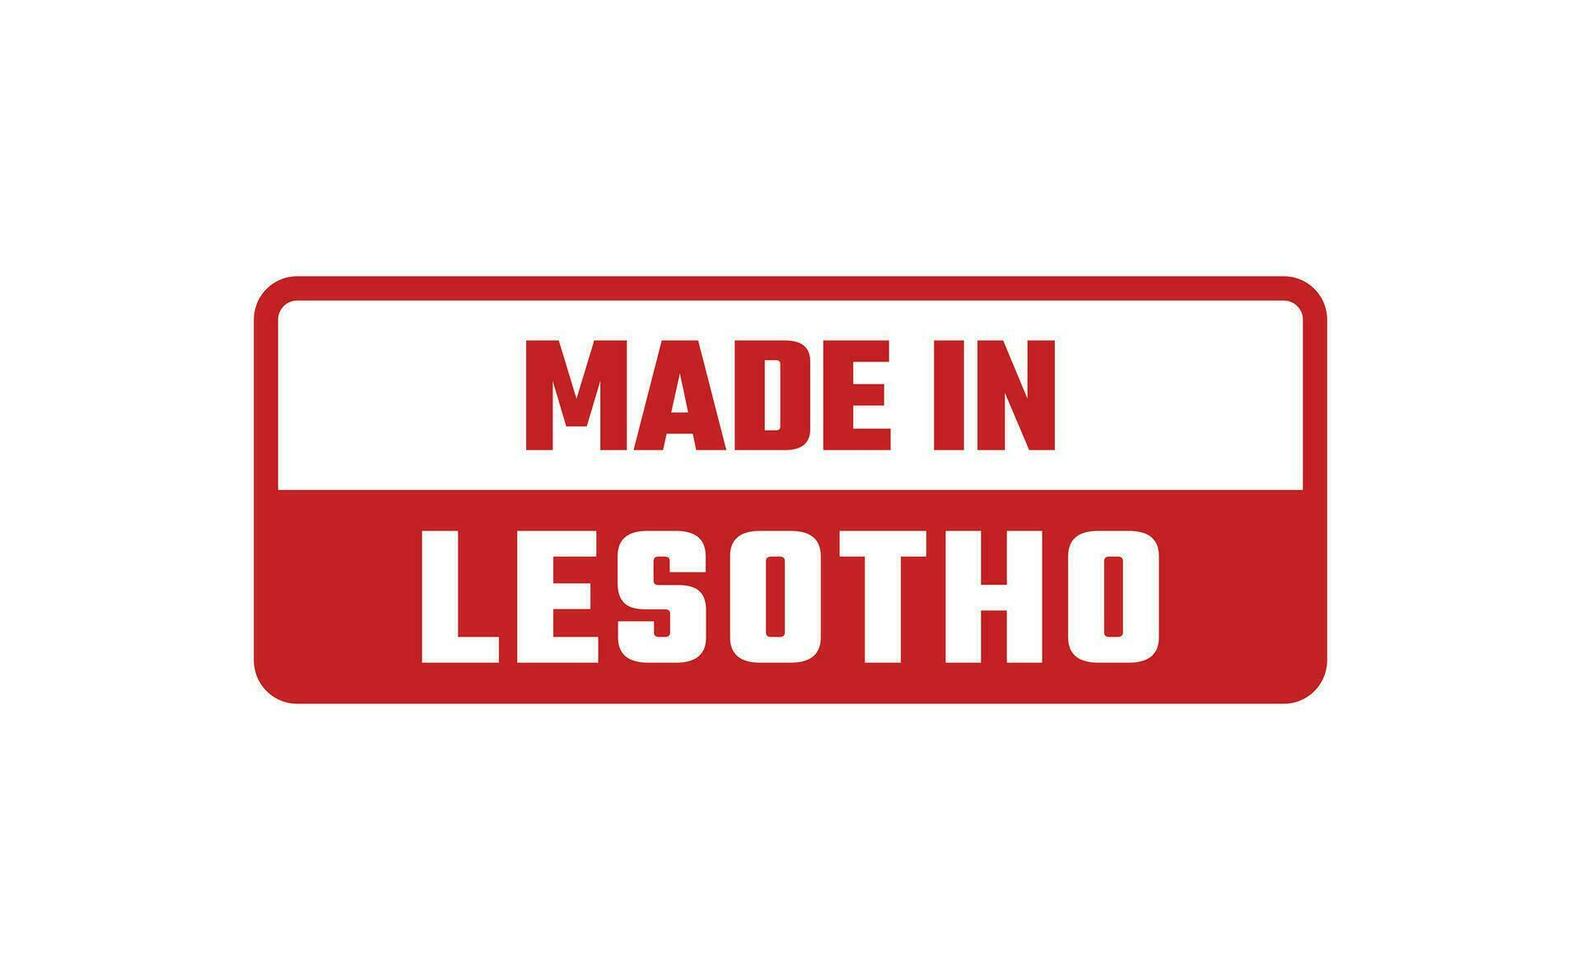 Made In Lesotho Rubber Stamp vector